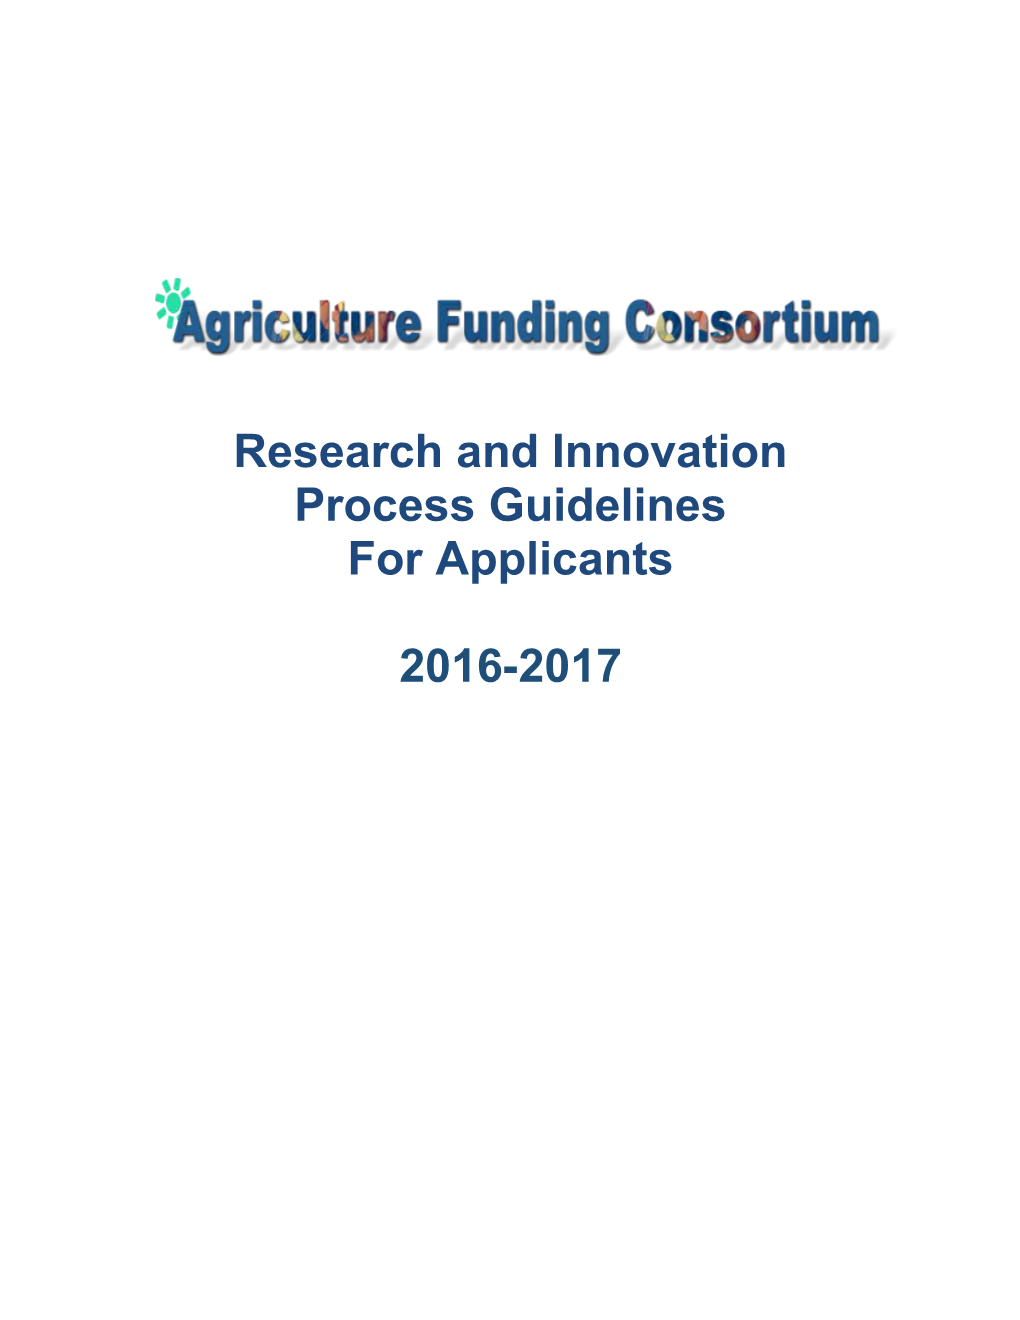 Agriculture Research Funding